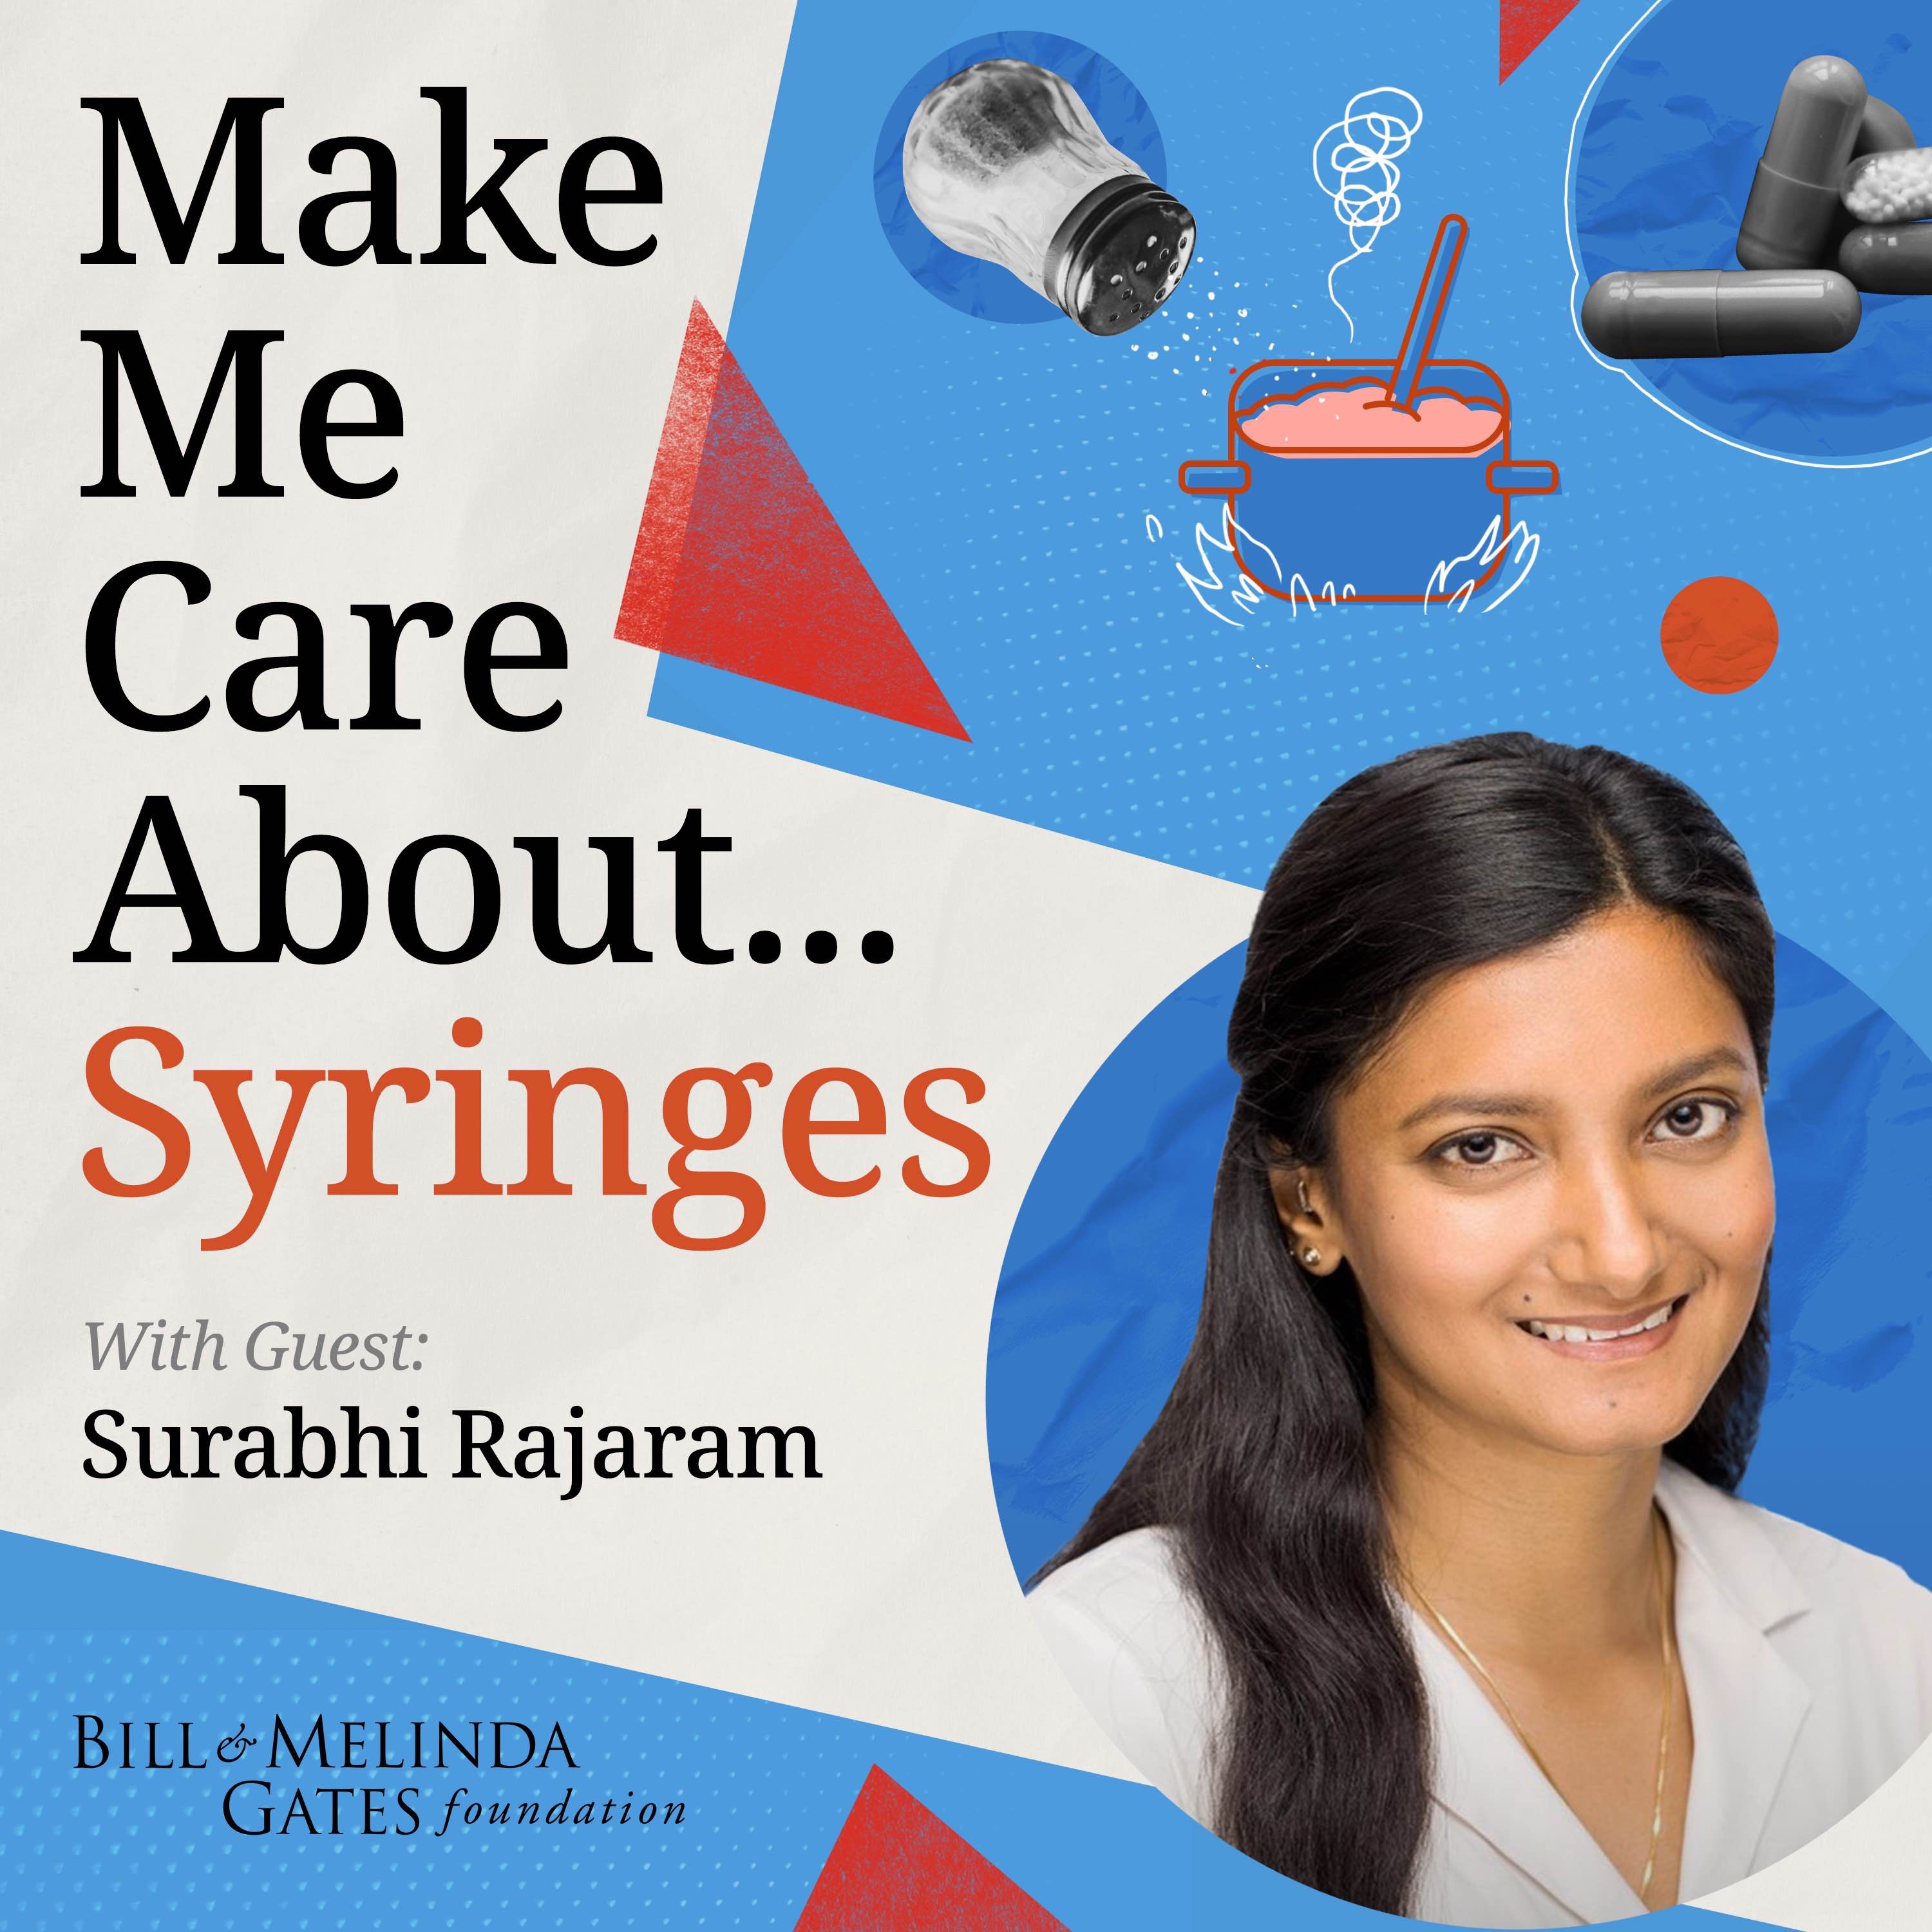 Make Me Care About Syringes